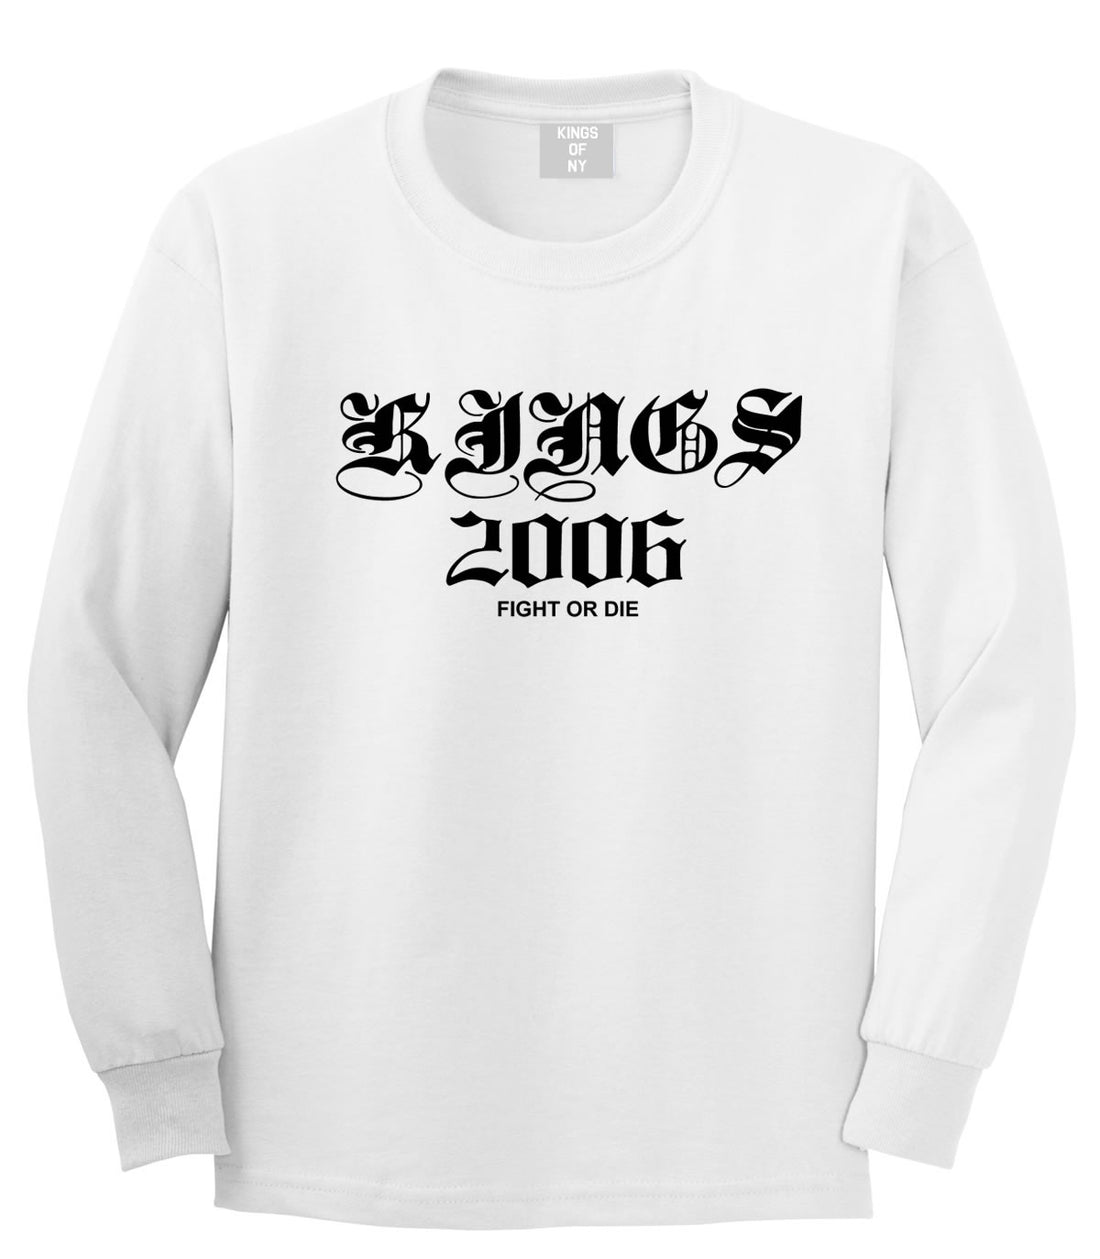 Kings Of NY Kings 2006 Long Sleeve T-Shirt in White